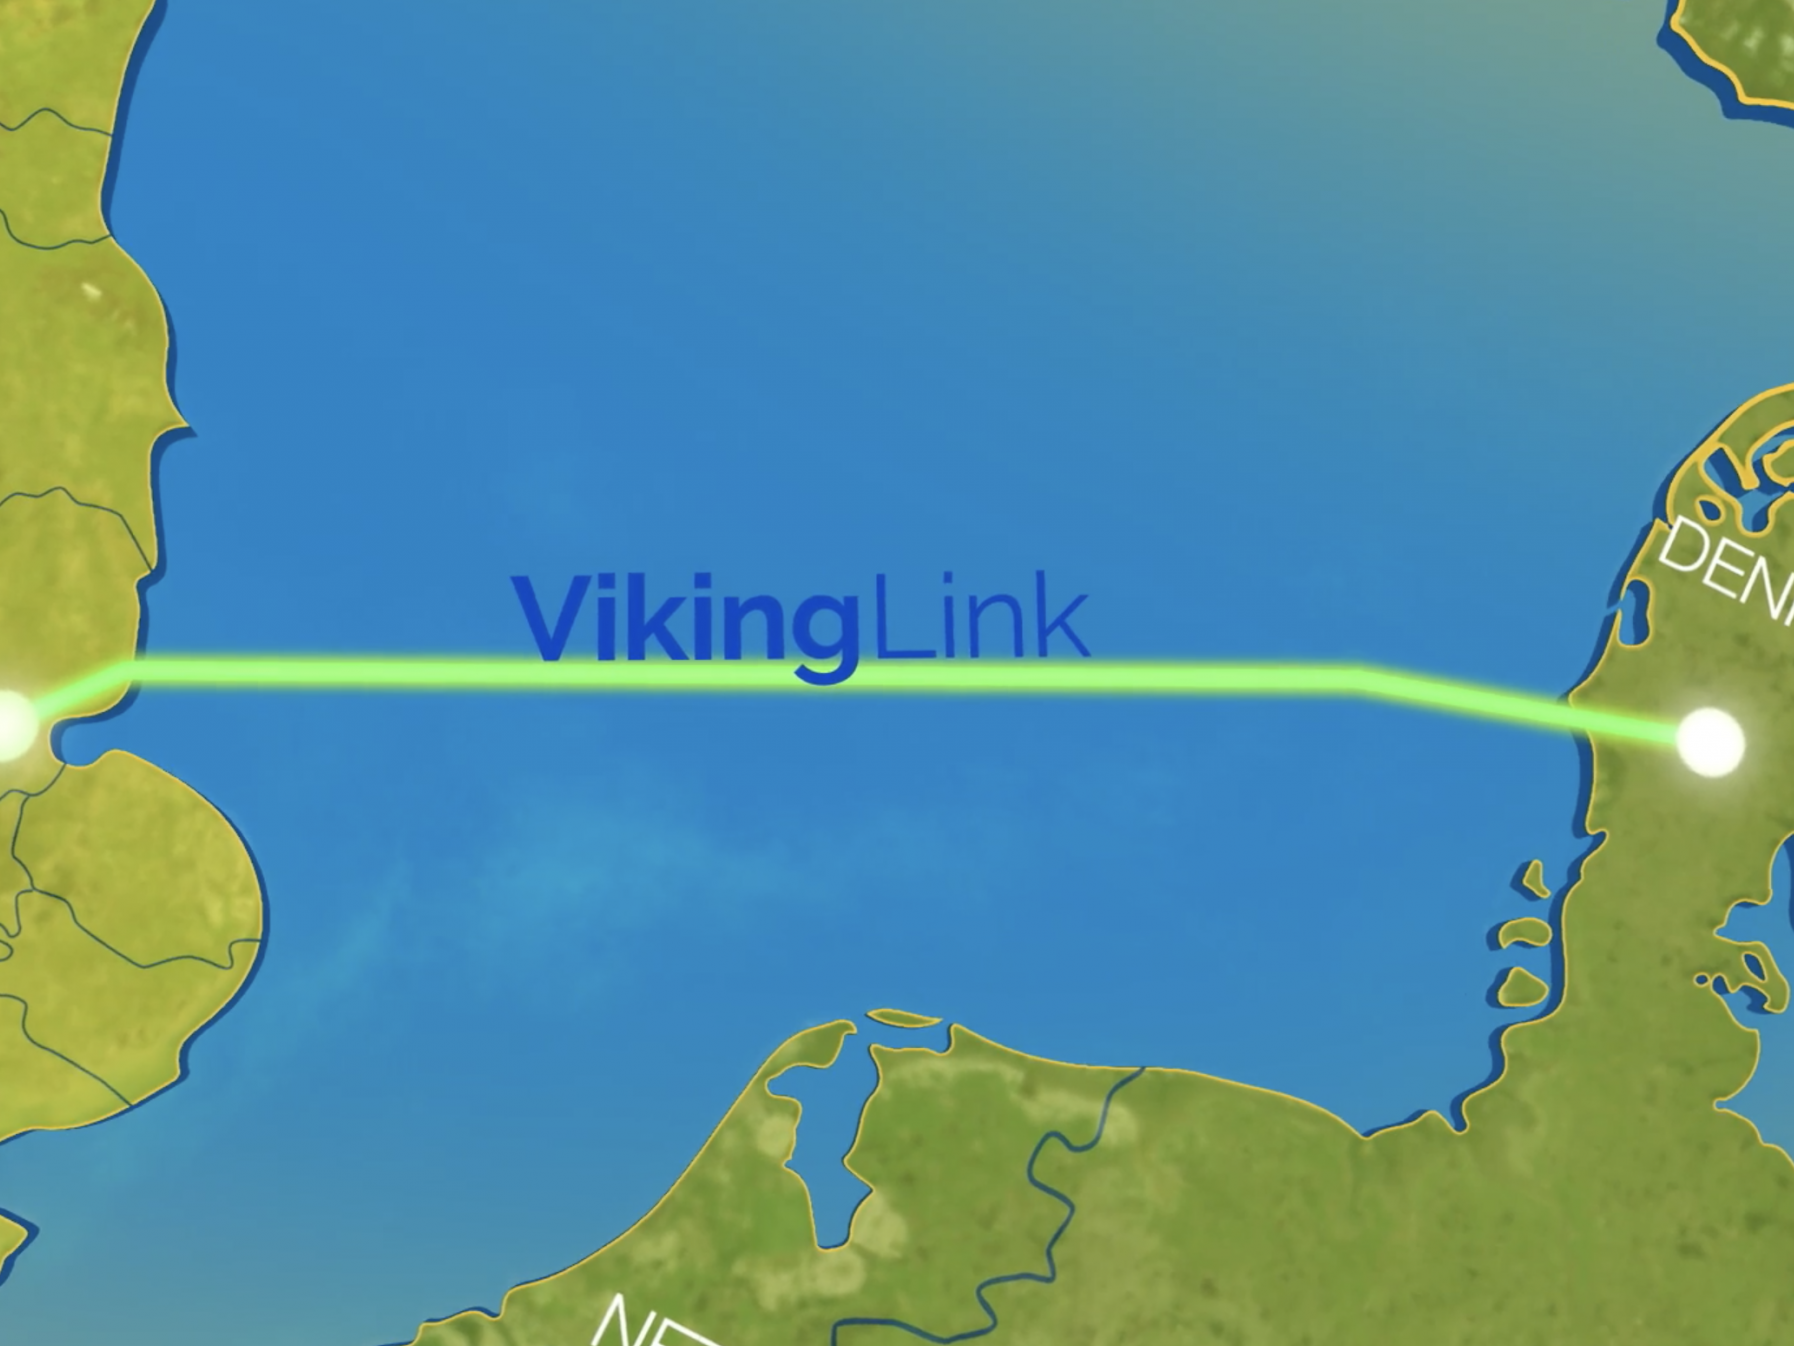 Construction begins on world&apos;s longest electricity cable to share clean power between UK and Denmark thumbnail